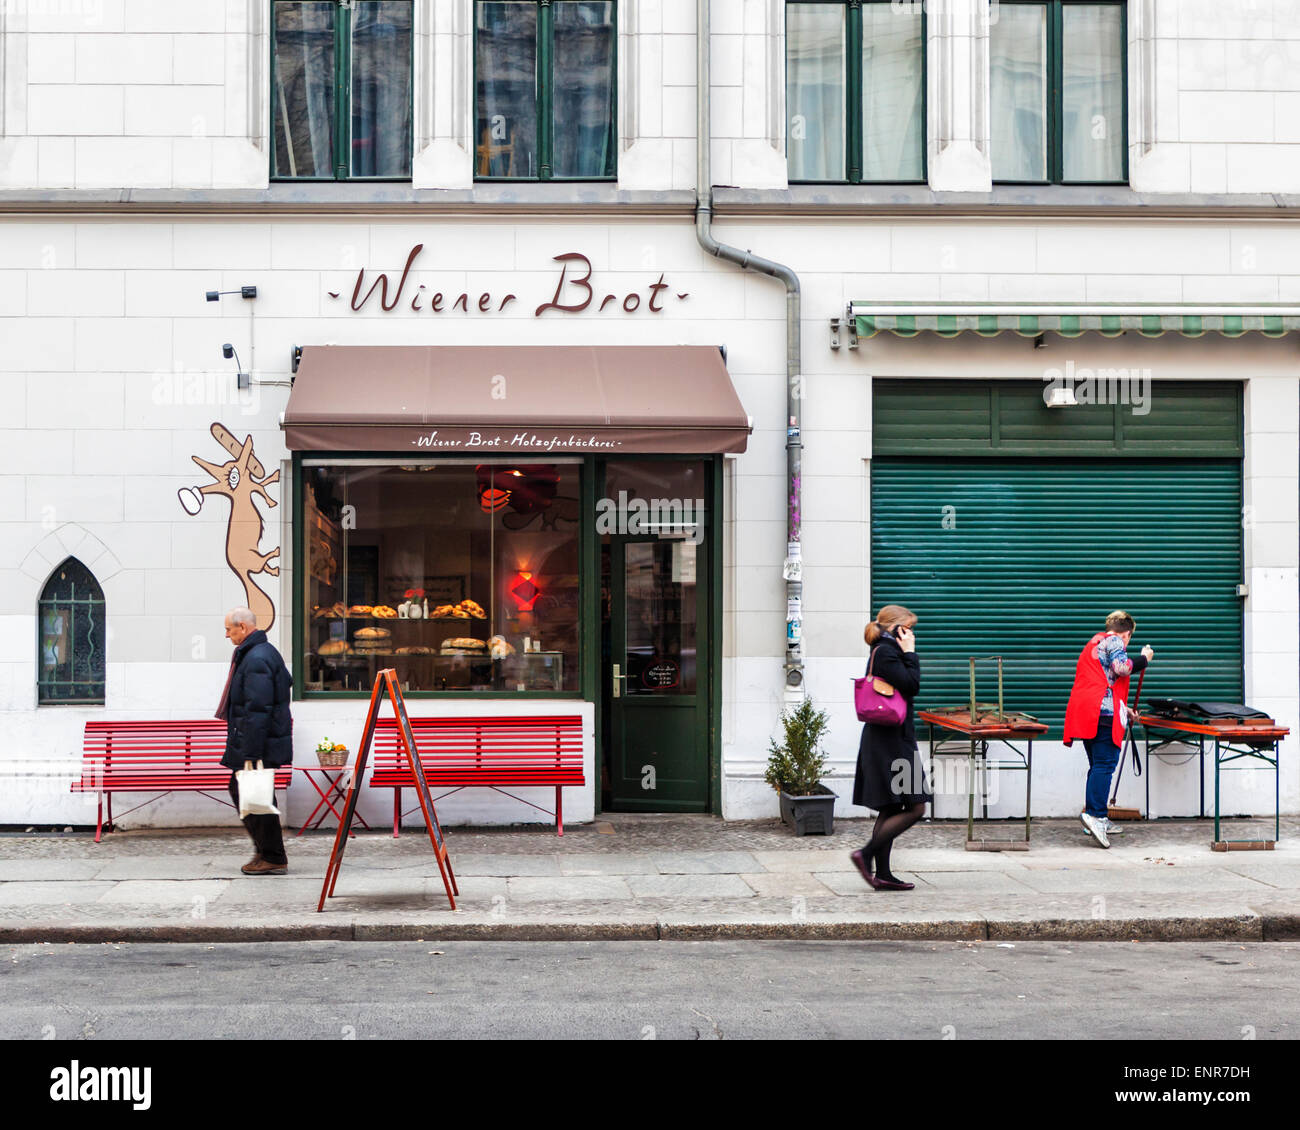 Wiener Brot, bakery shop exterior and display window with red benches on pavement, Tucholskystrasse, Berlin Stock Photo